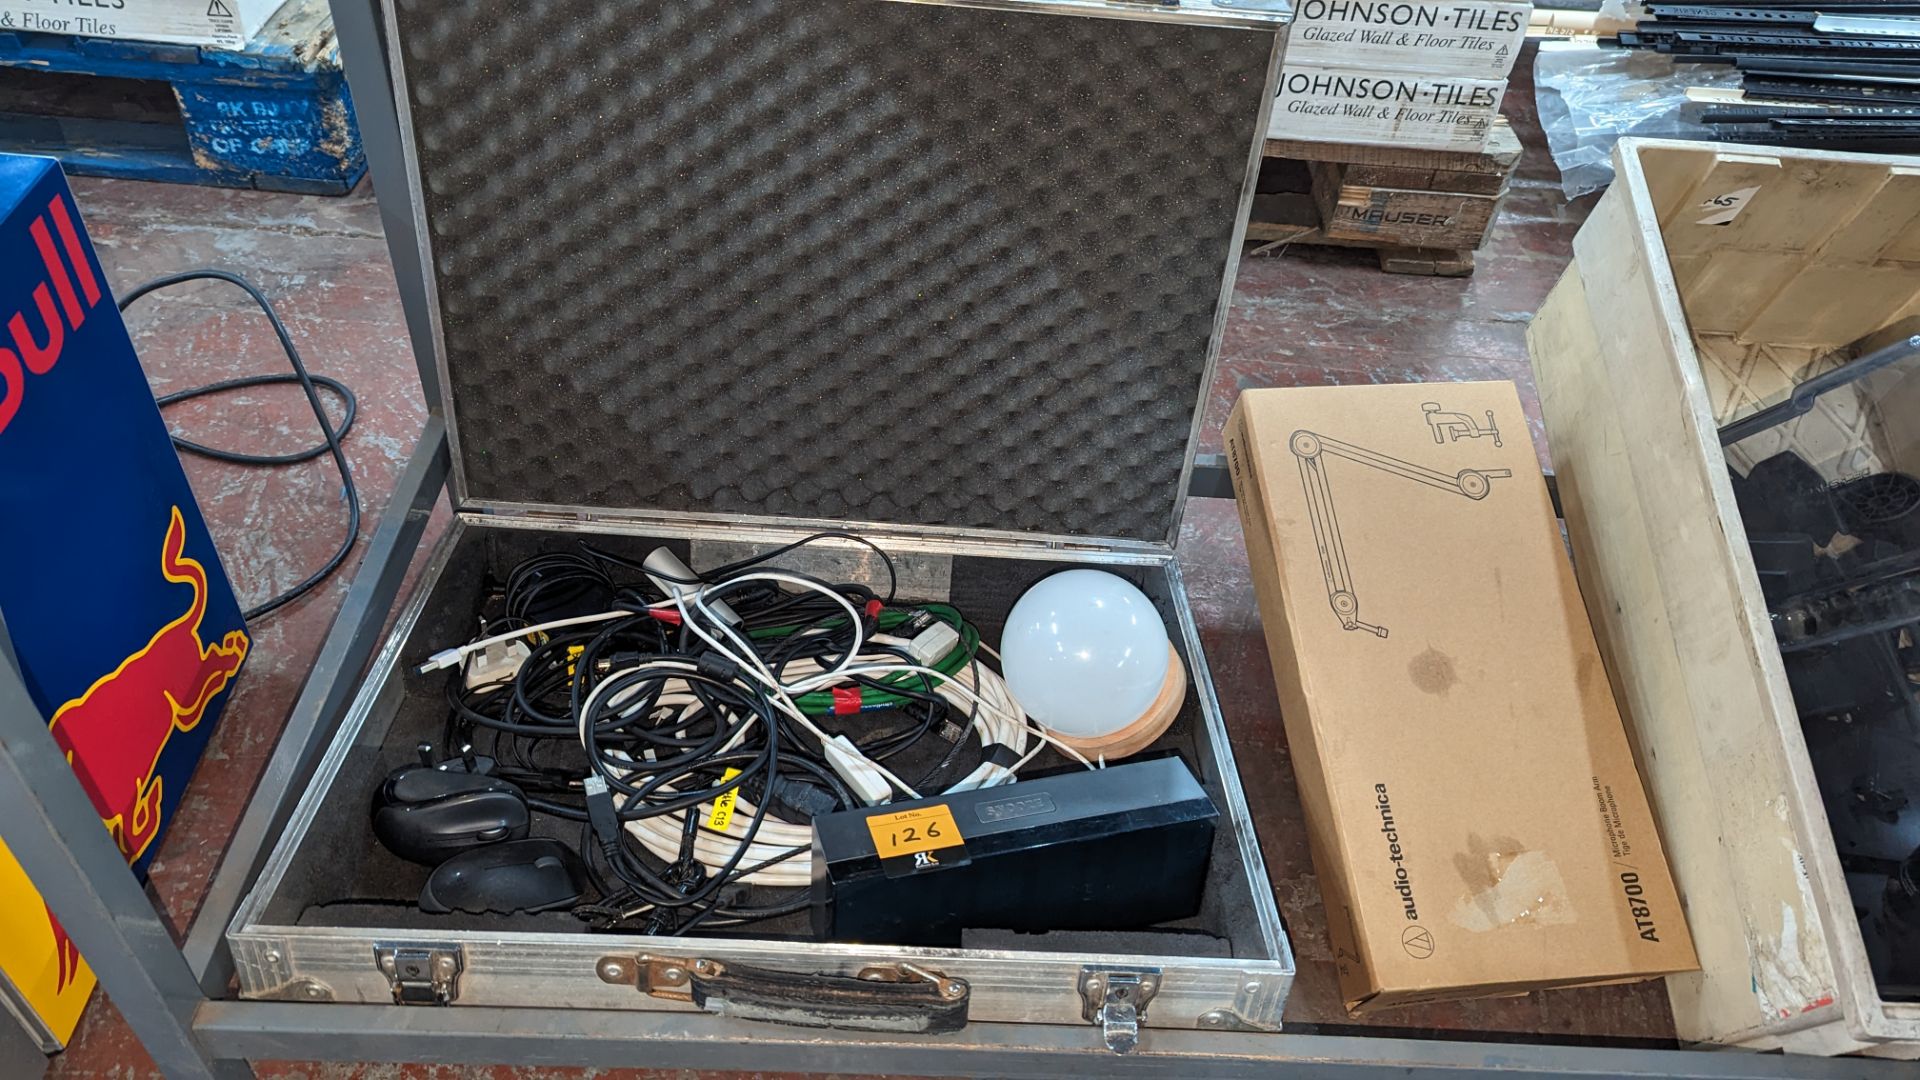 Flight case and contents of assorted cables and miscellaneous items